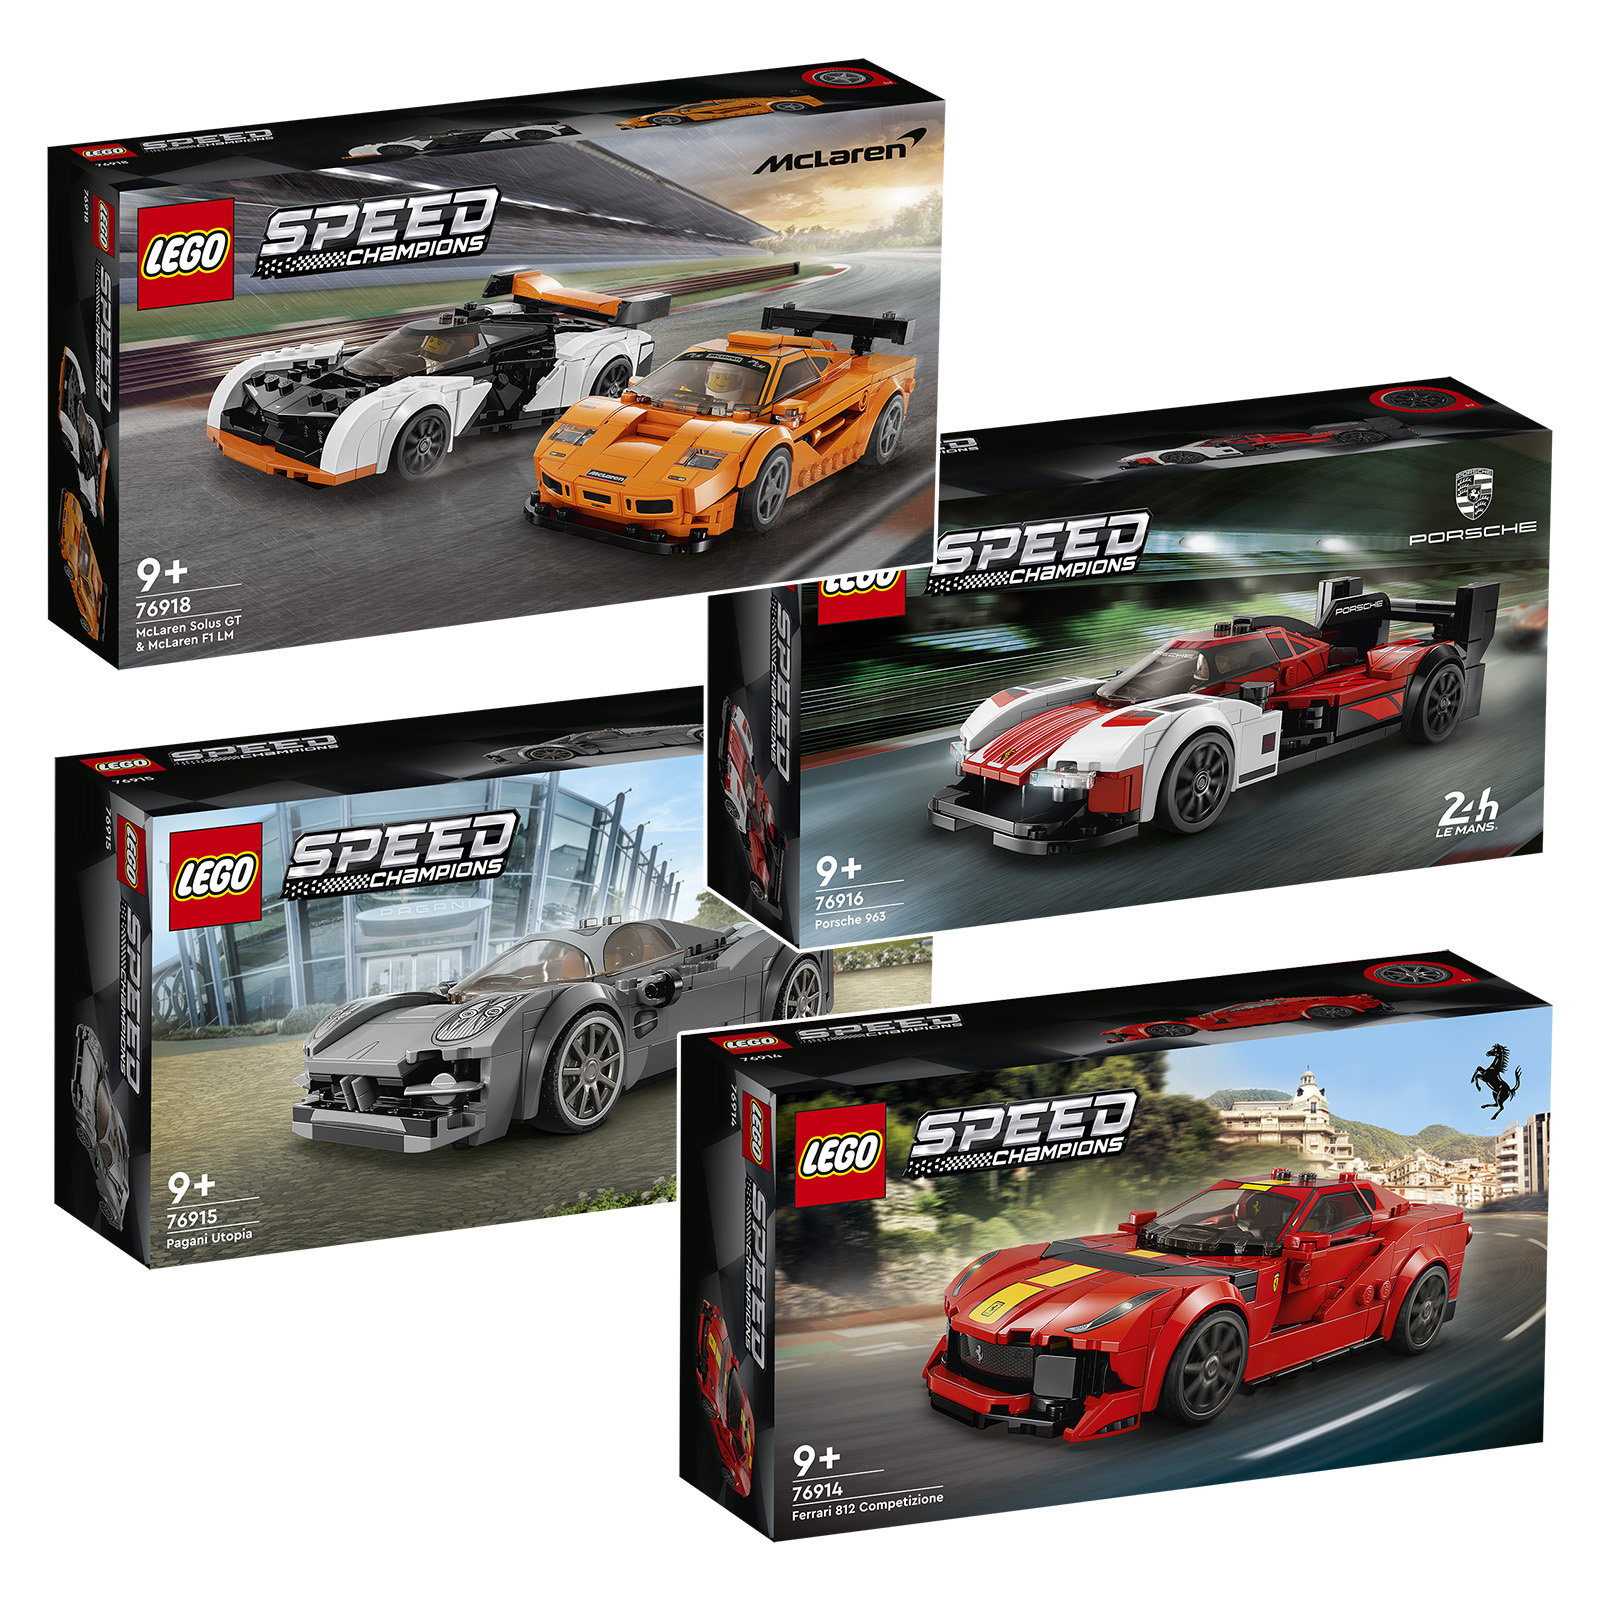 Lego Speed Champions series adds McLaren, Pagani and more for 2023